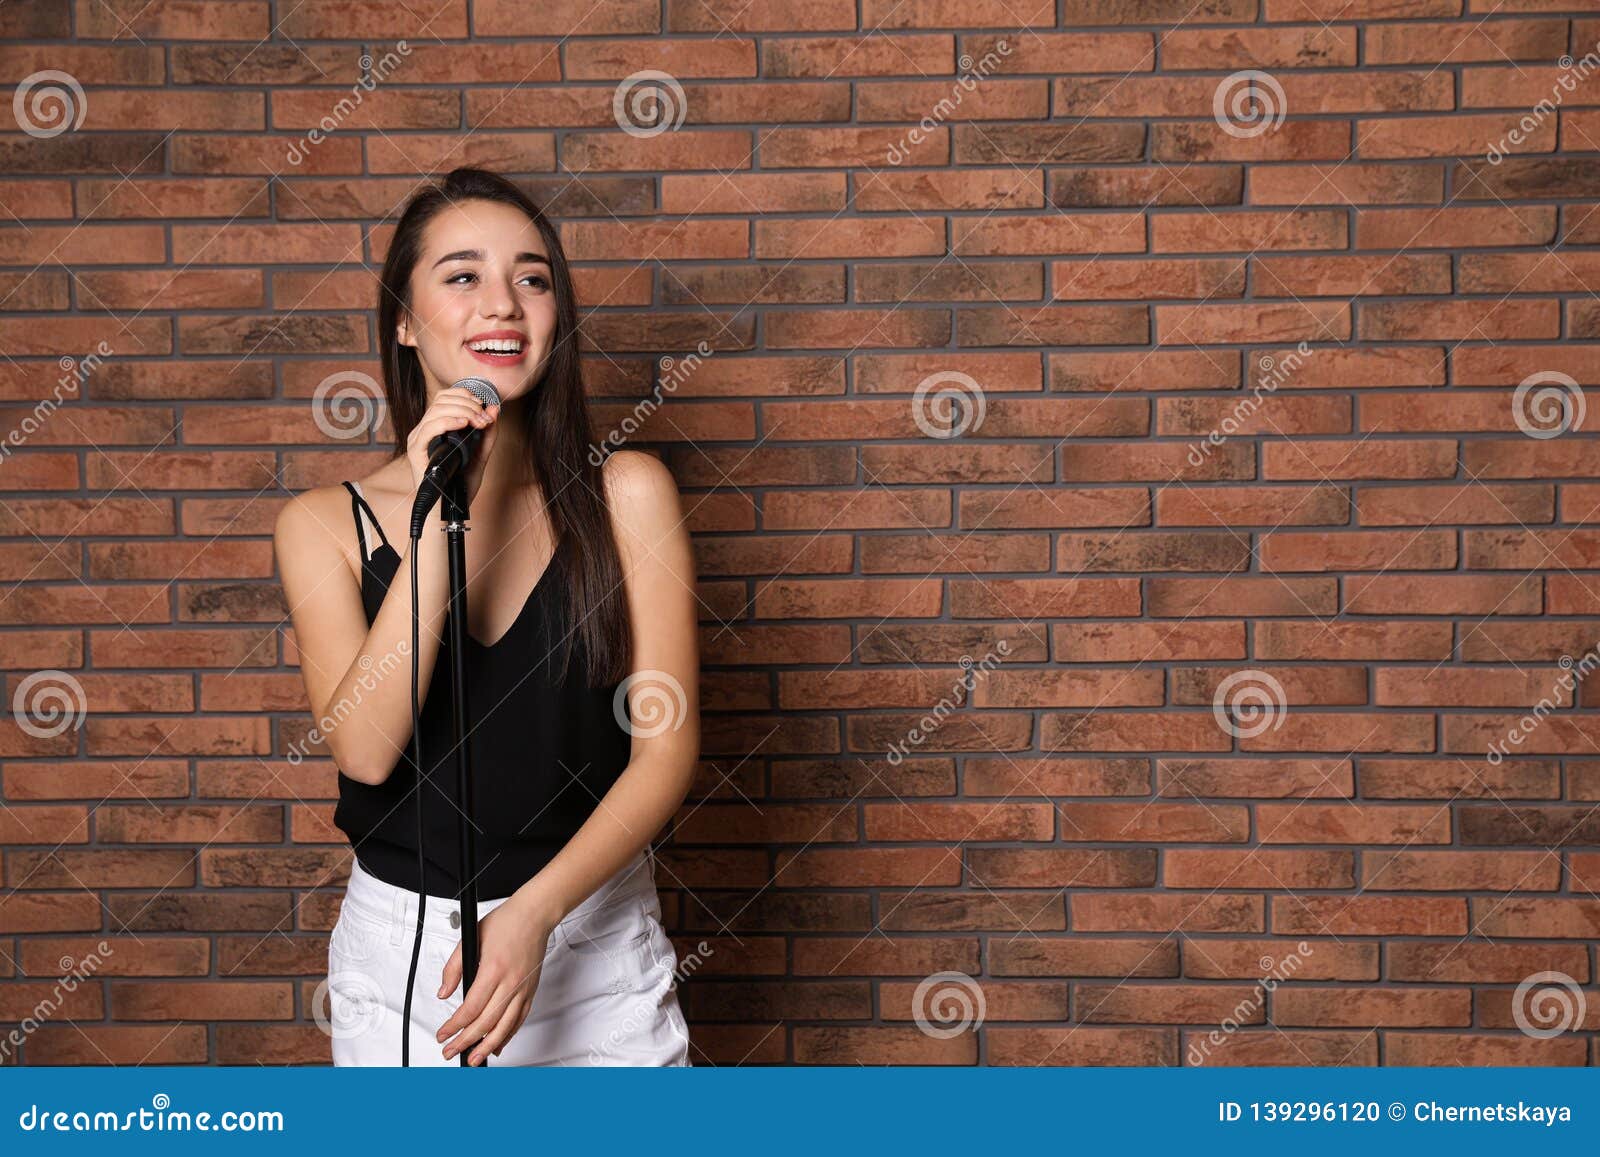 Young Stylish Woman Posing with Microphone Near Brick Wall. Stock ...